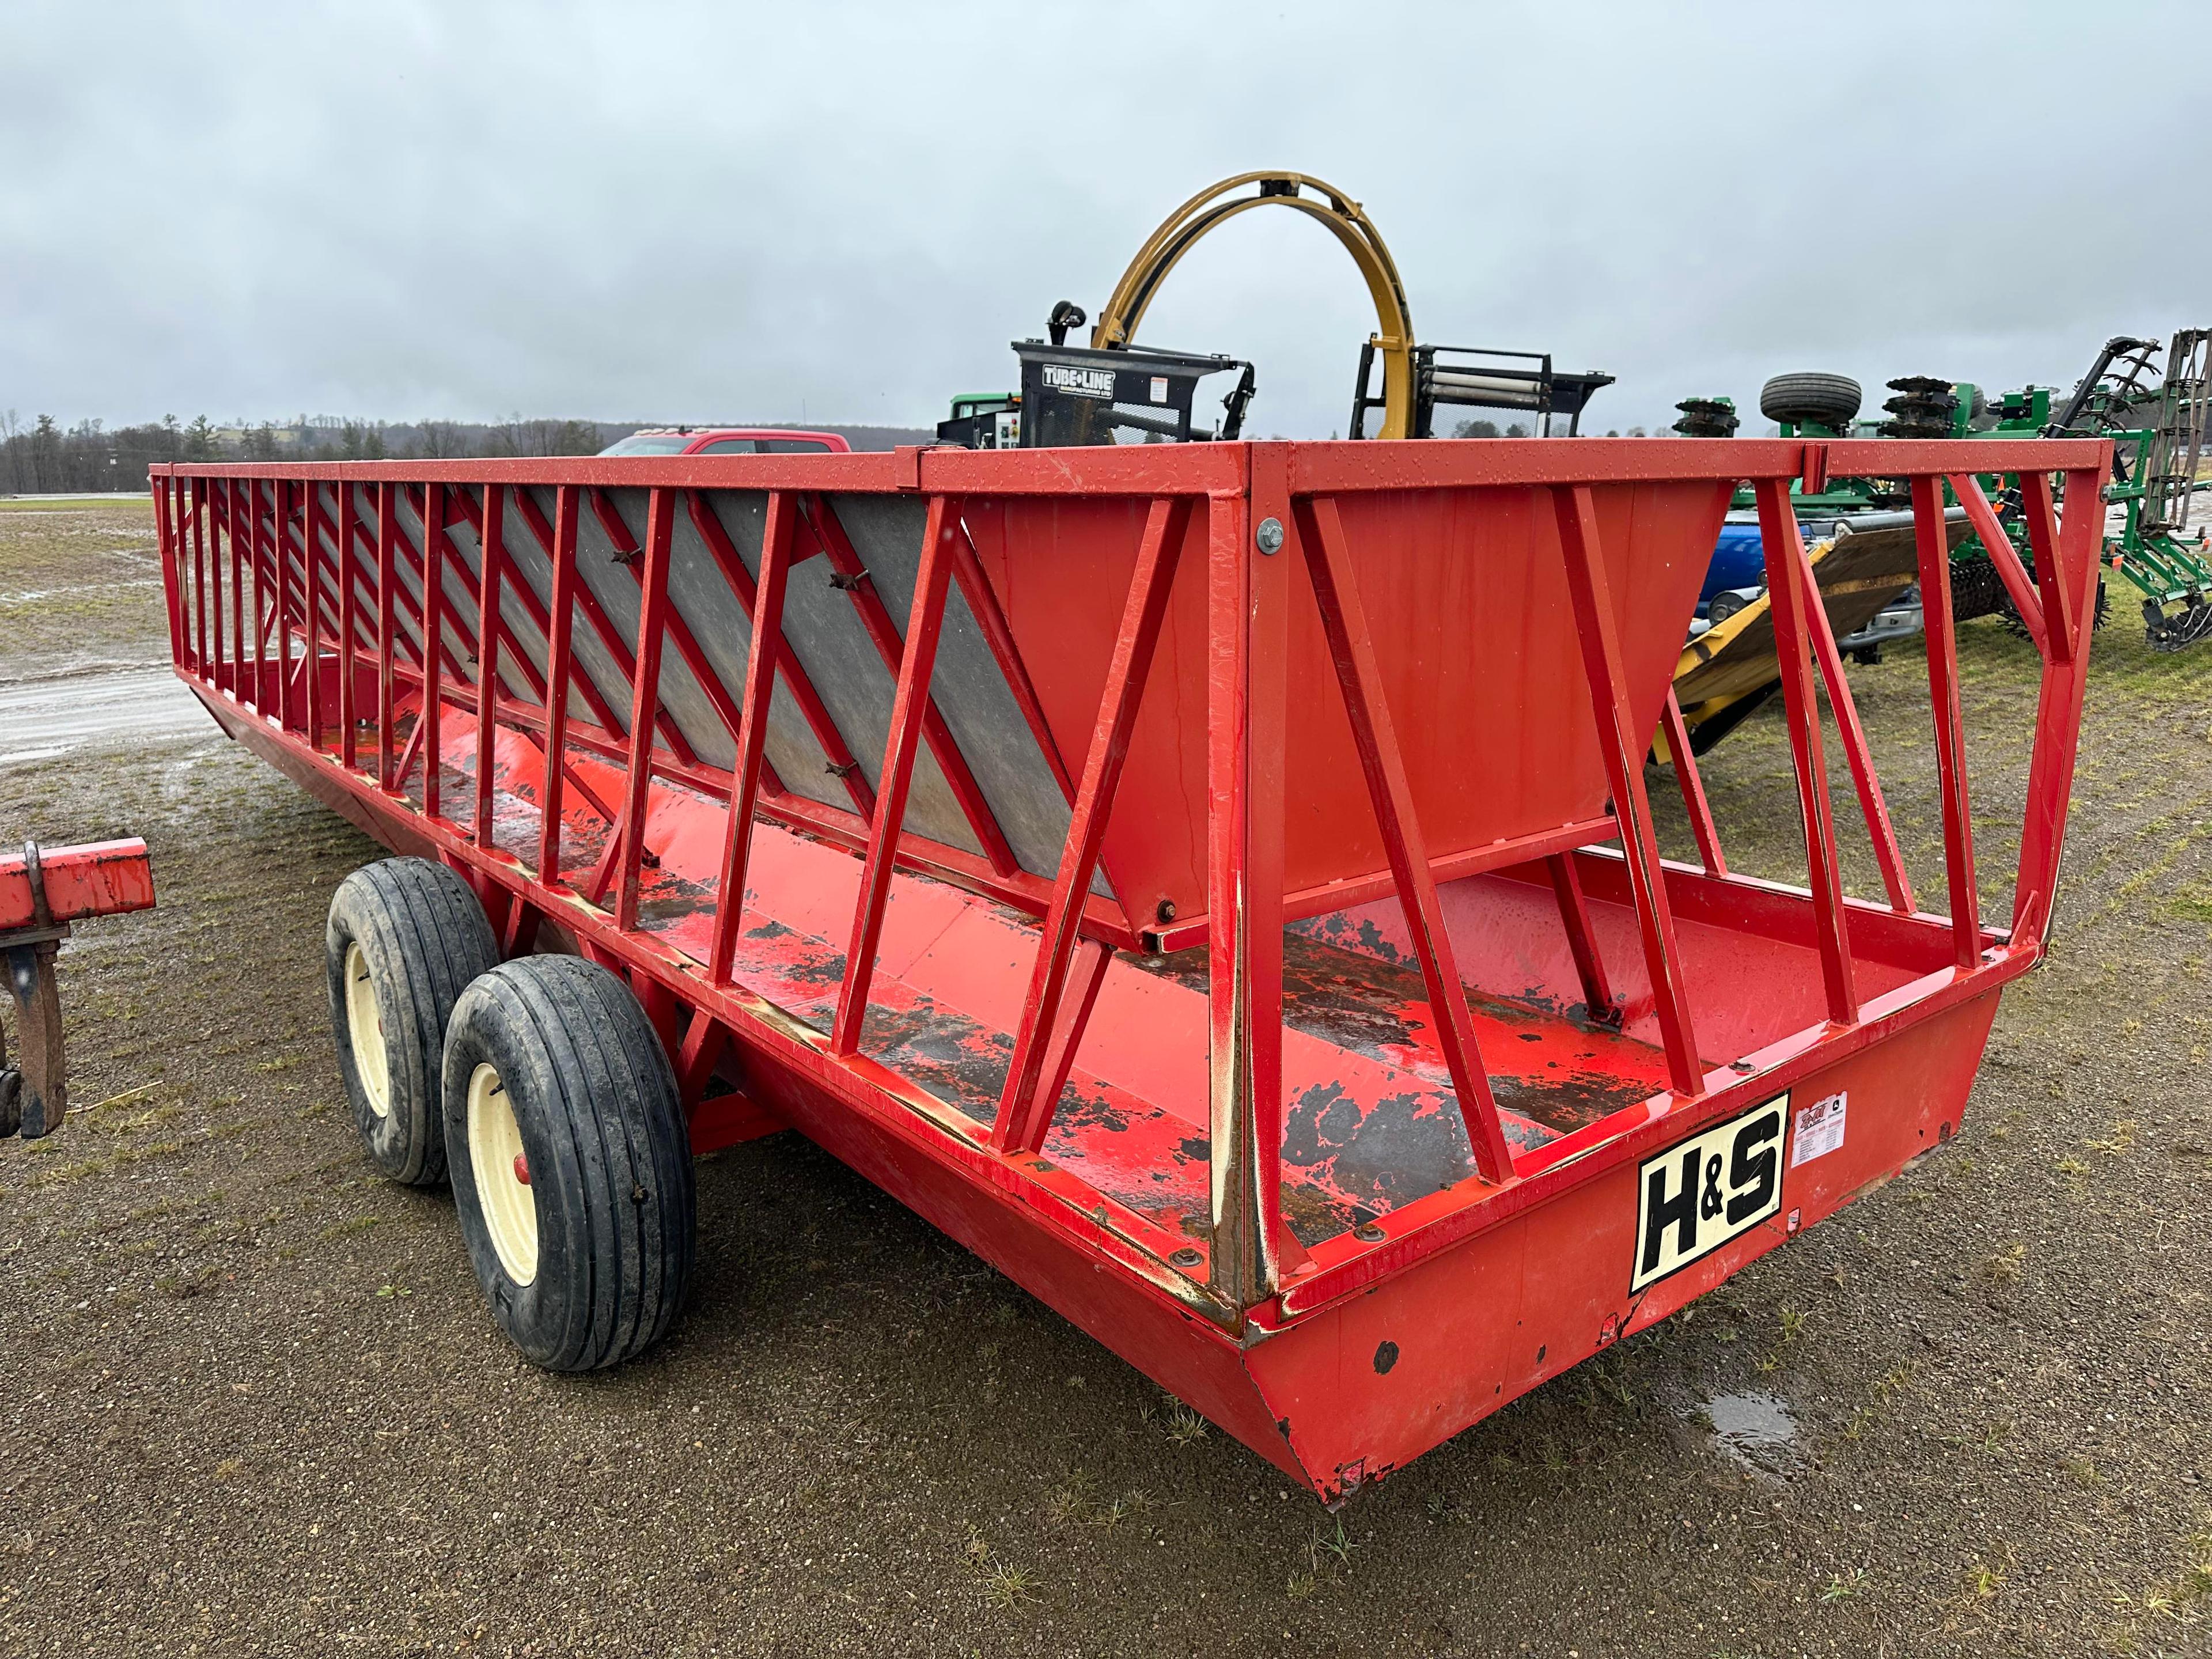 H&S 24’ Tandem Axle Feeder Wagon With Inserts,Good Floor